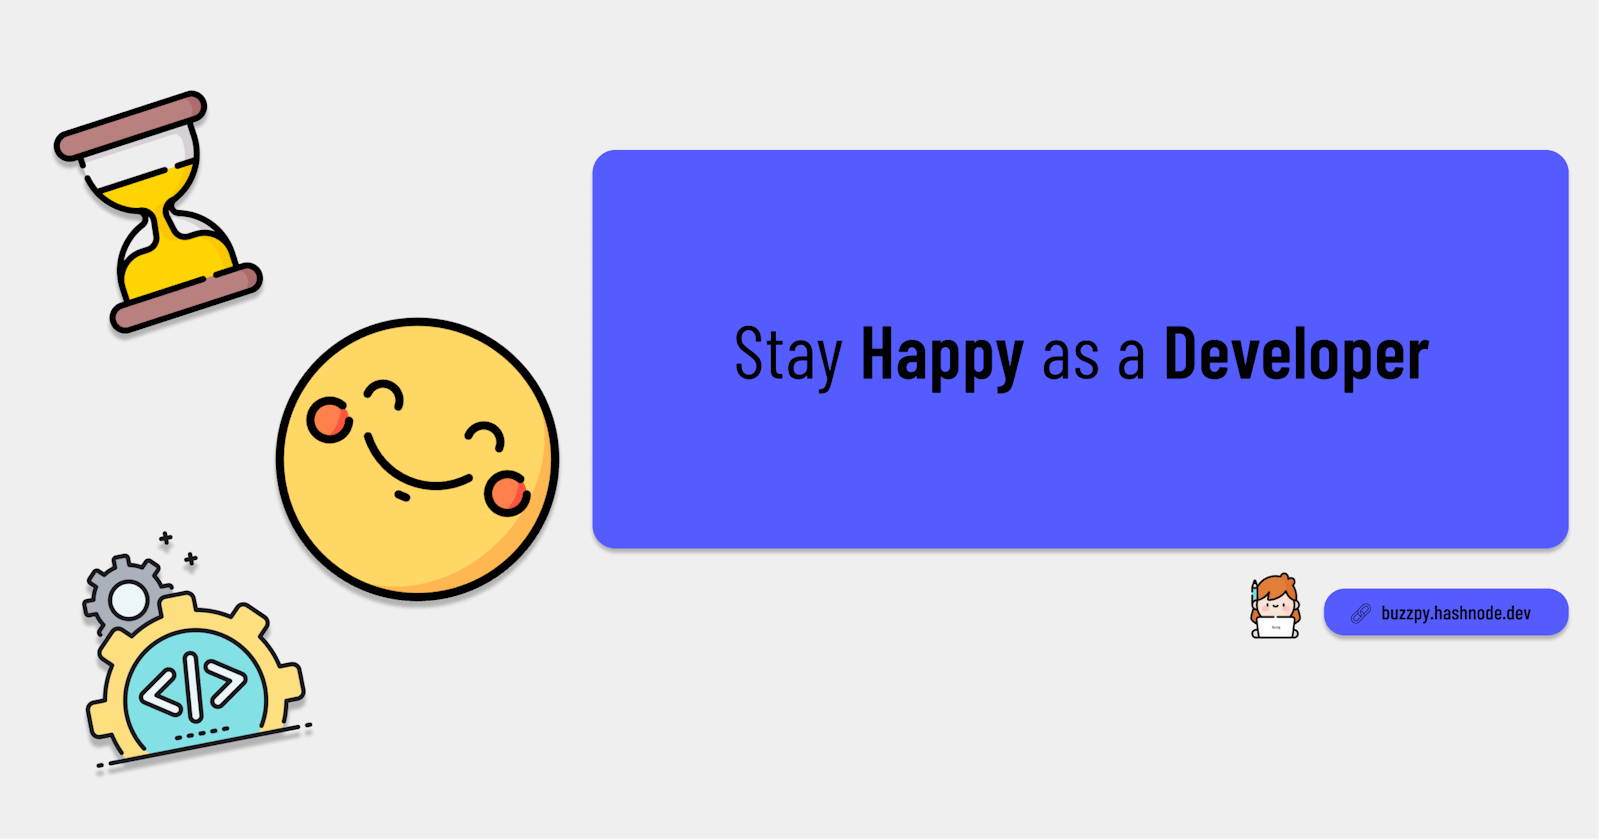 How Do I Stay Happy as a Developer?